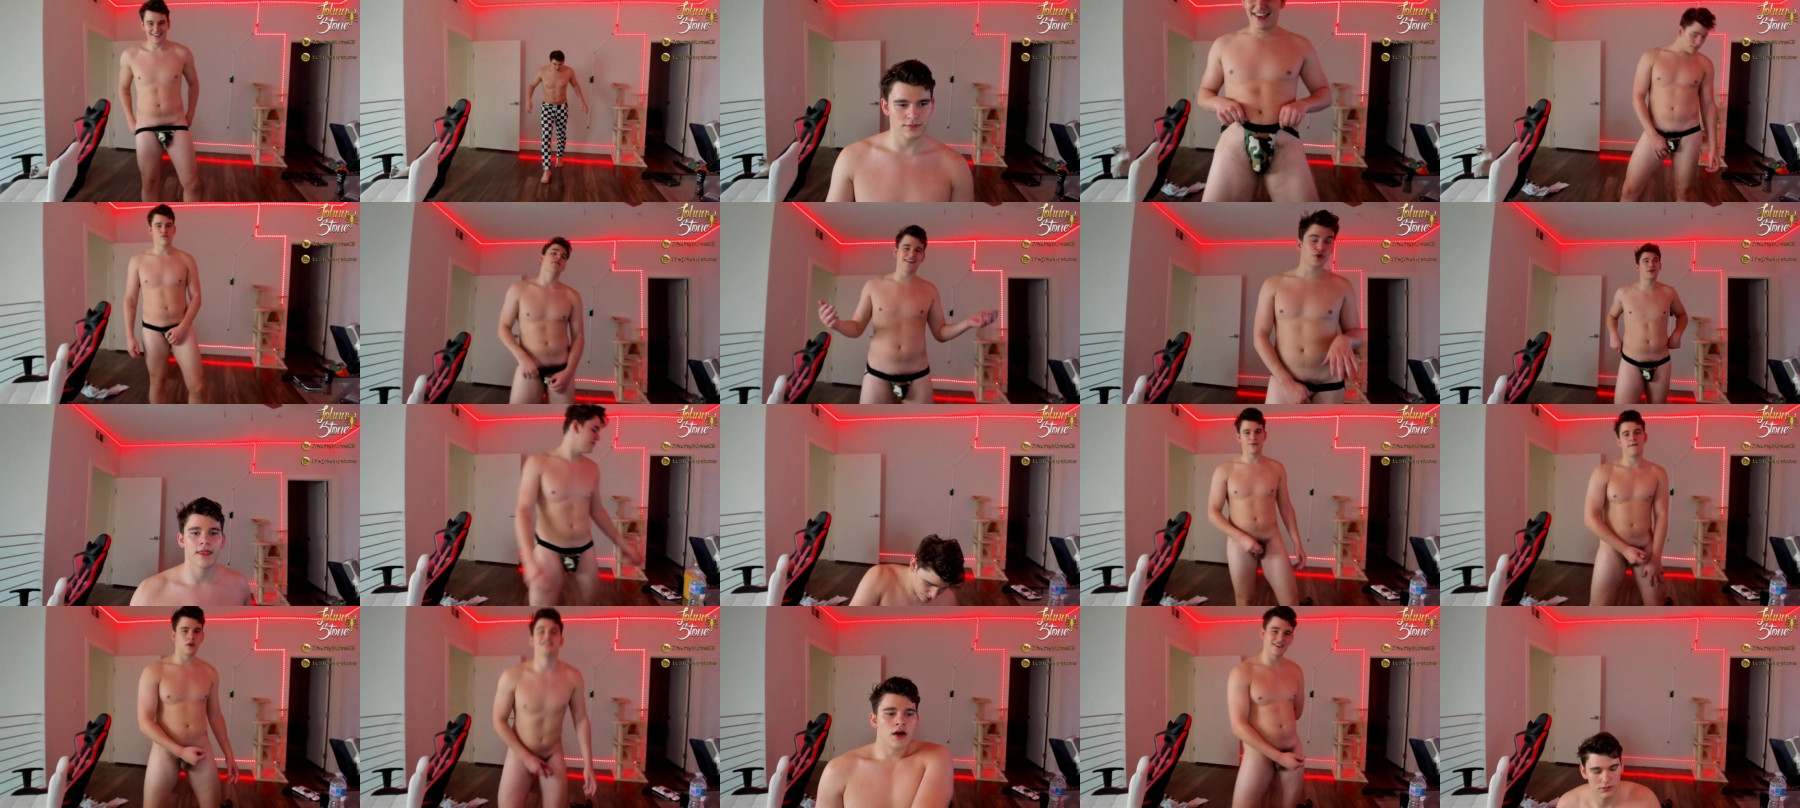 Thejohnnystone  15-06-2021 Male Ass